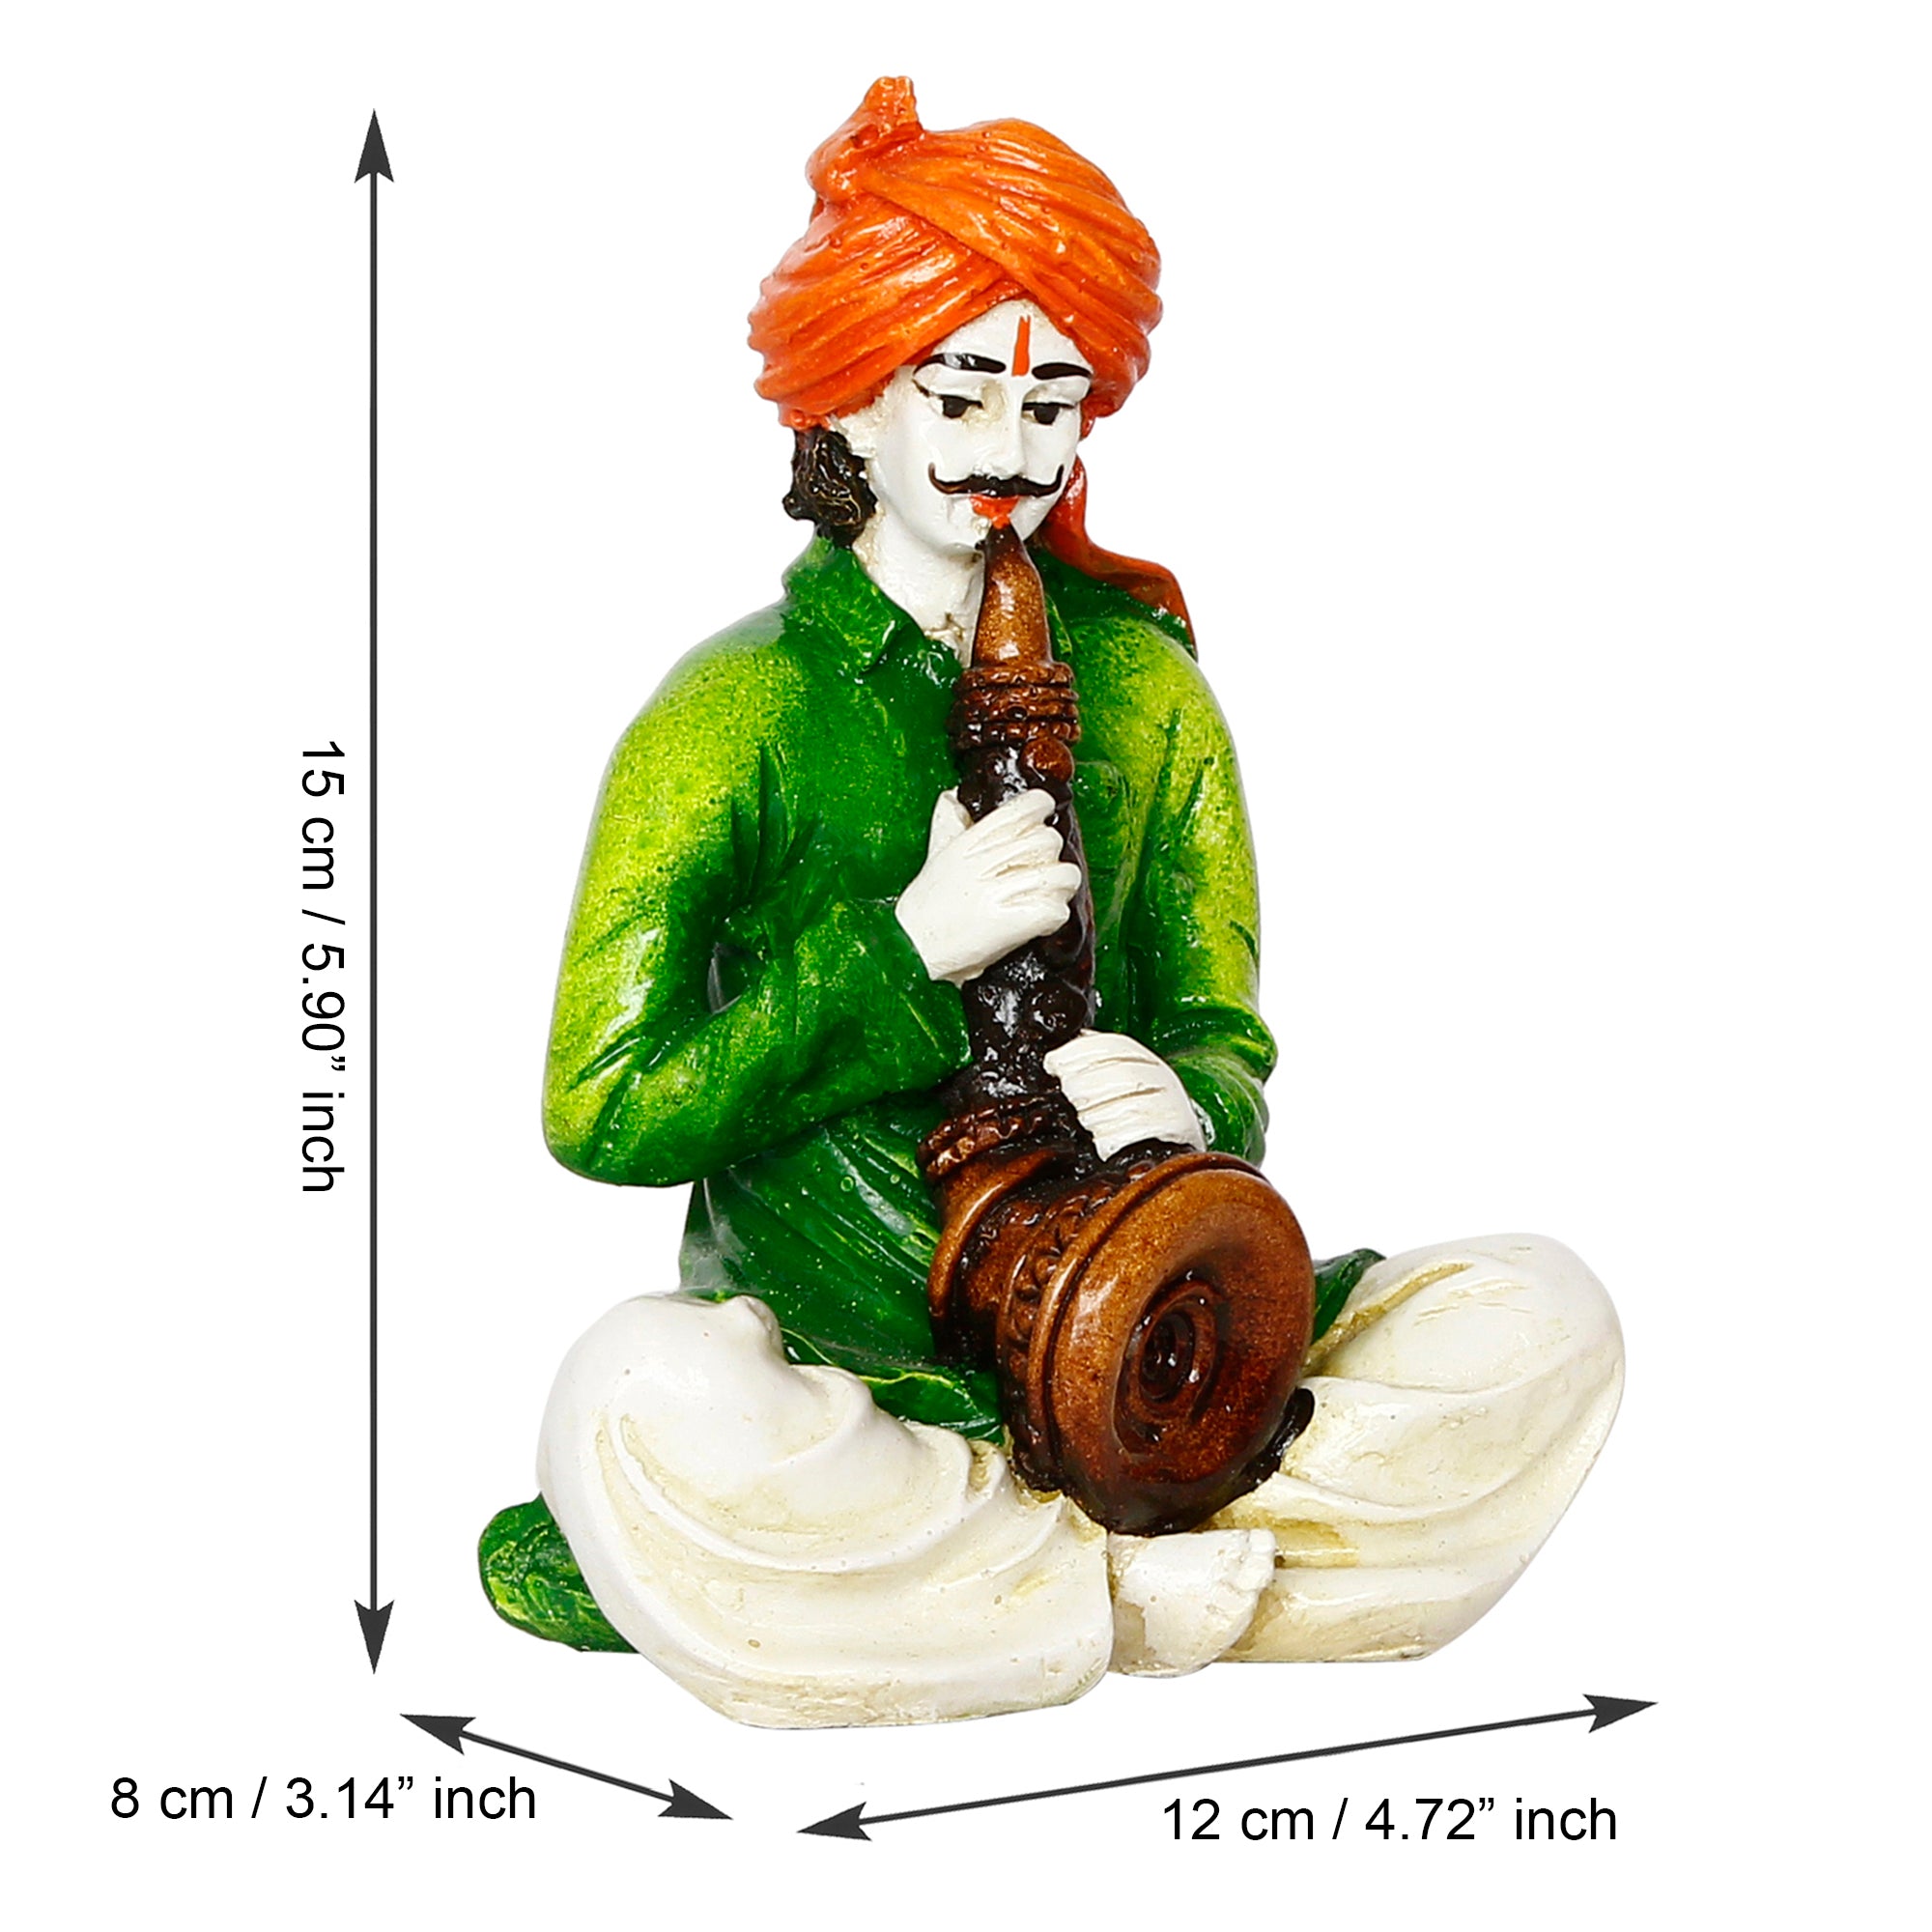 Polyresin Rajasthani Musician Men Statue Playing Musical Instrument Human Figurines Home Decor Showpiece 3